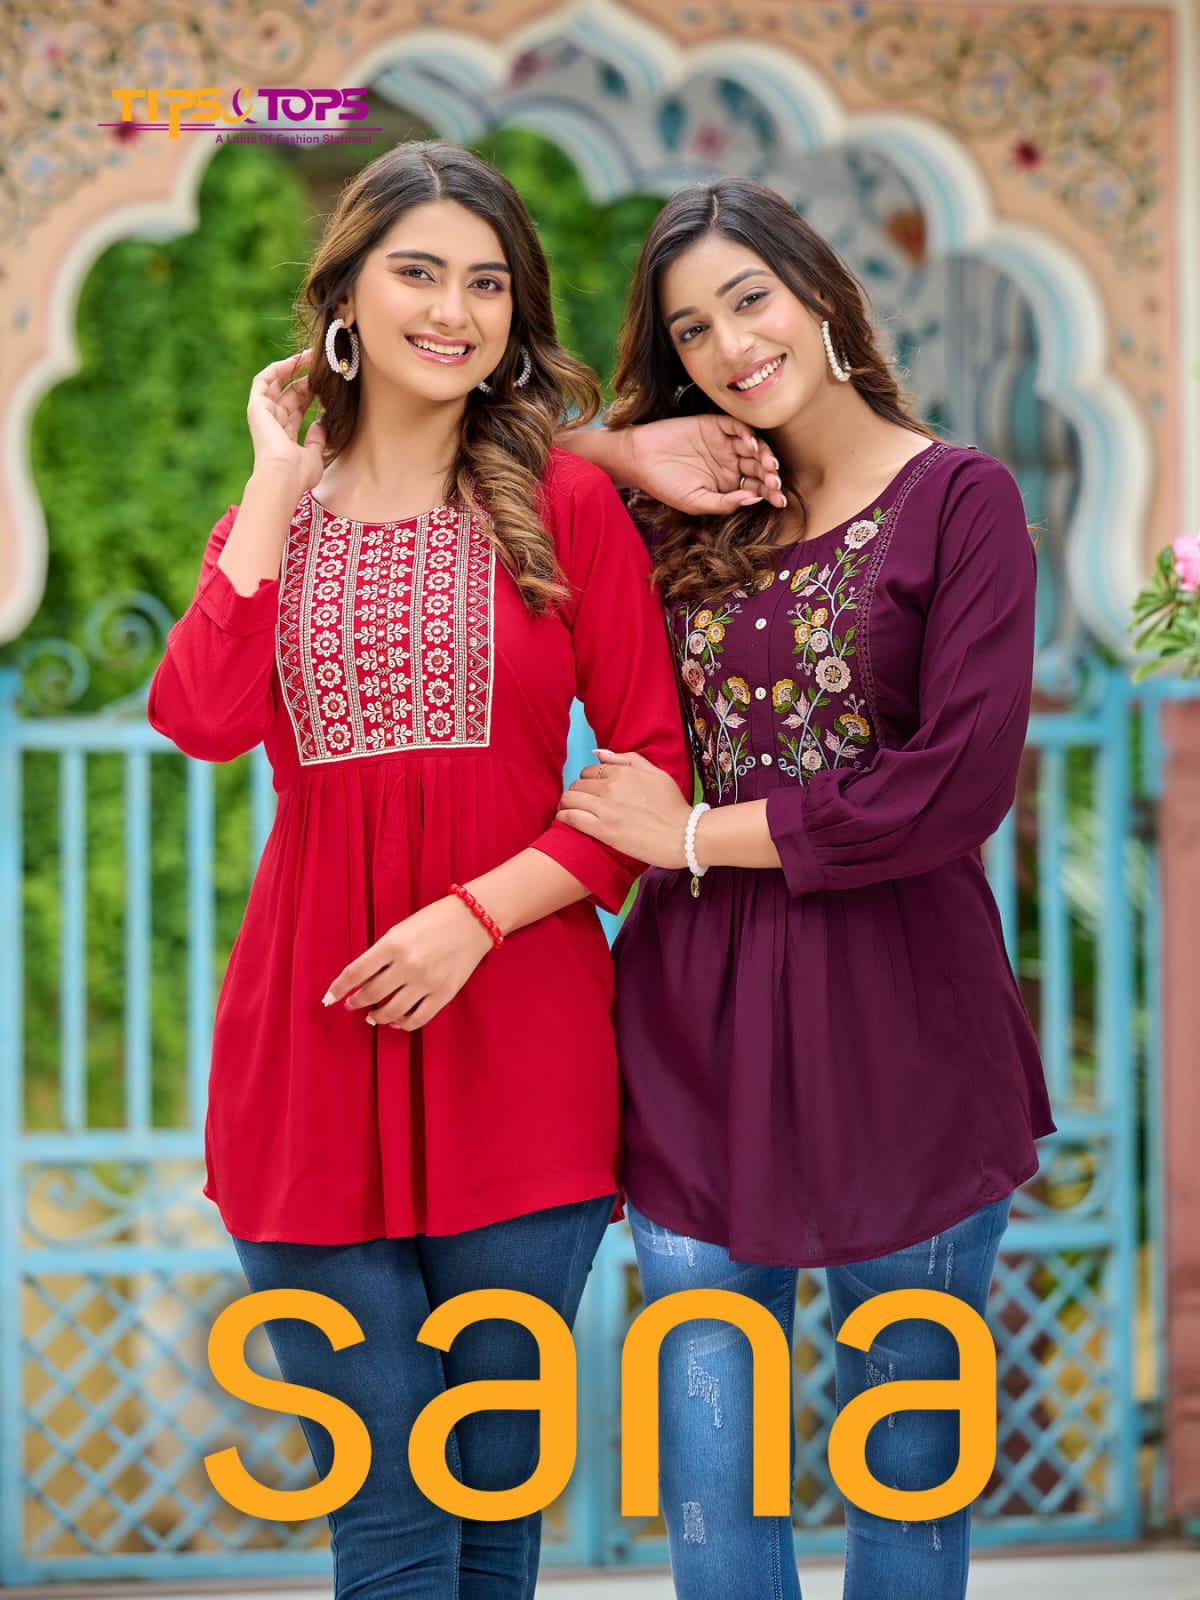 Tips Tops Sana Ladies Tops Catalog collection 2